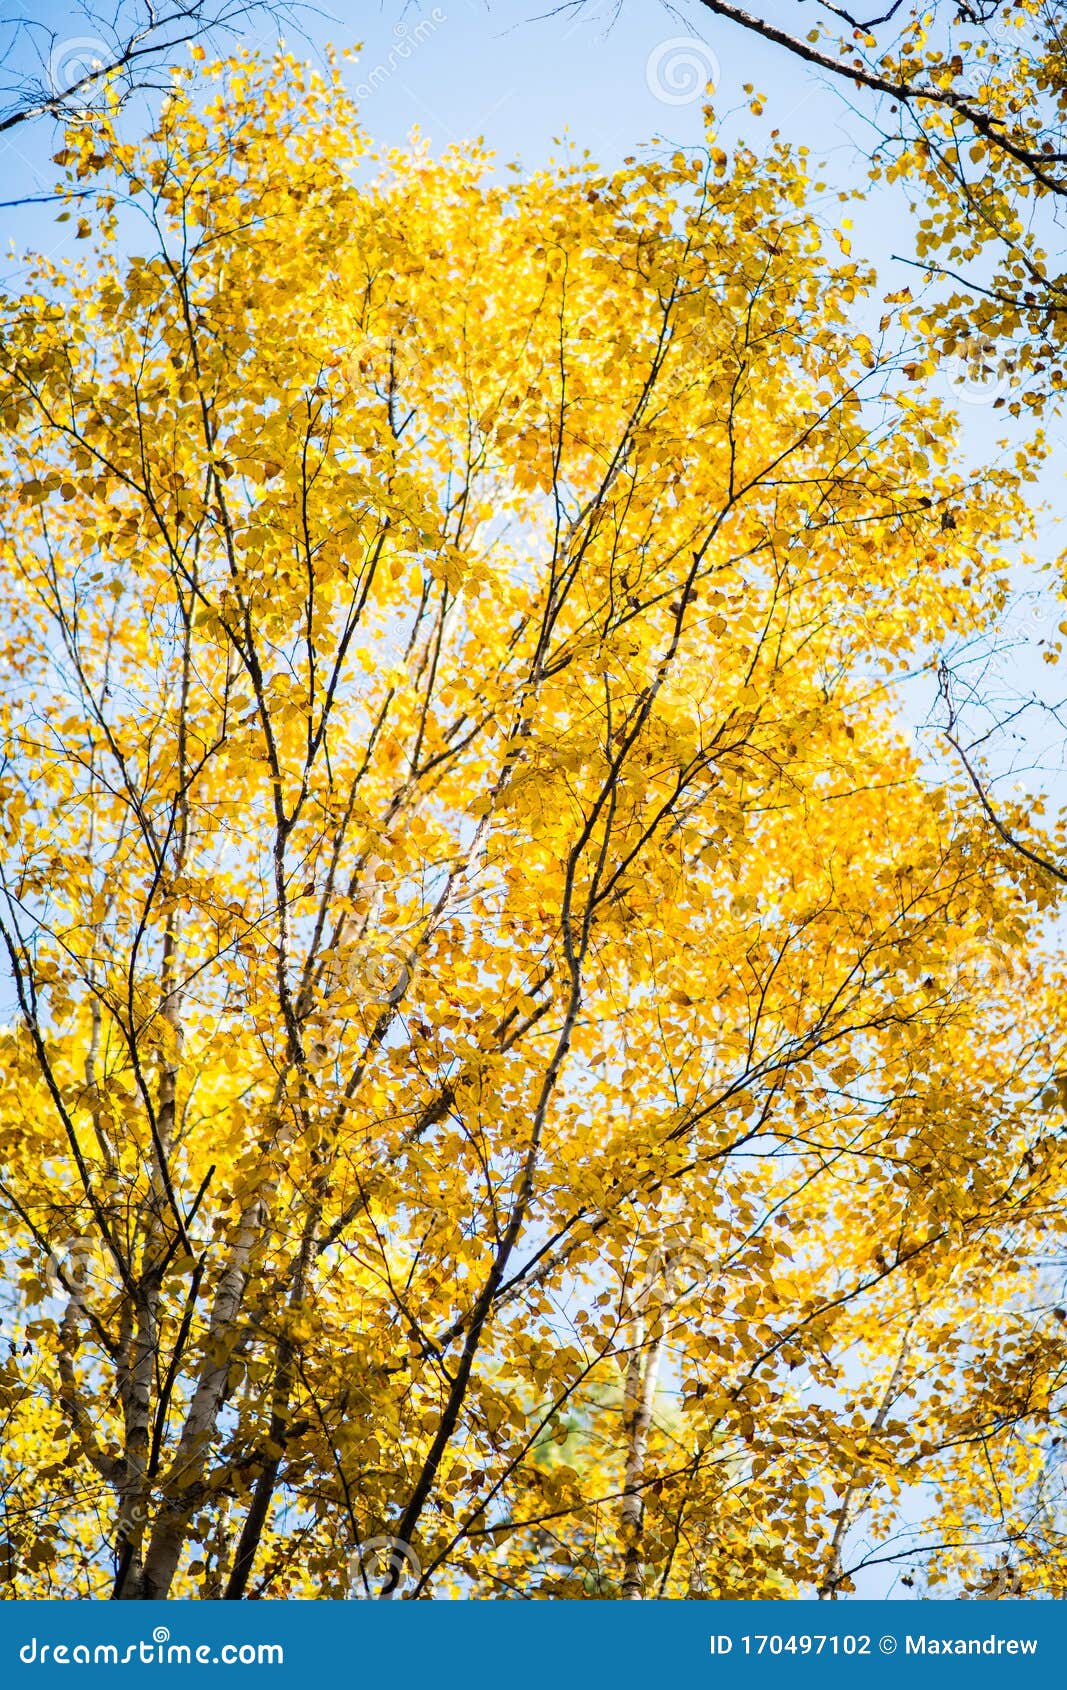 Cottonwood Tree Branches with Beautiful Golden Leaves Stock Photo ...